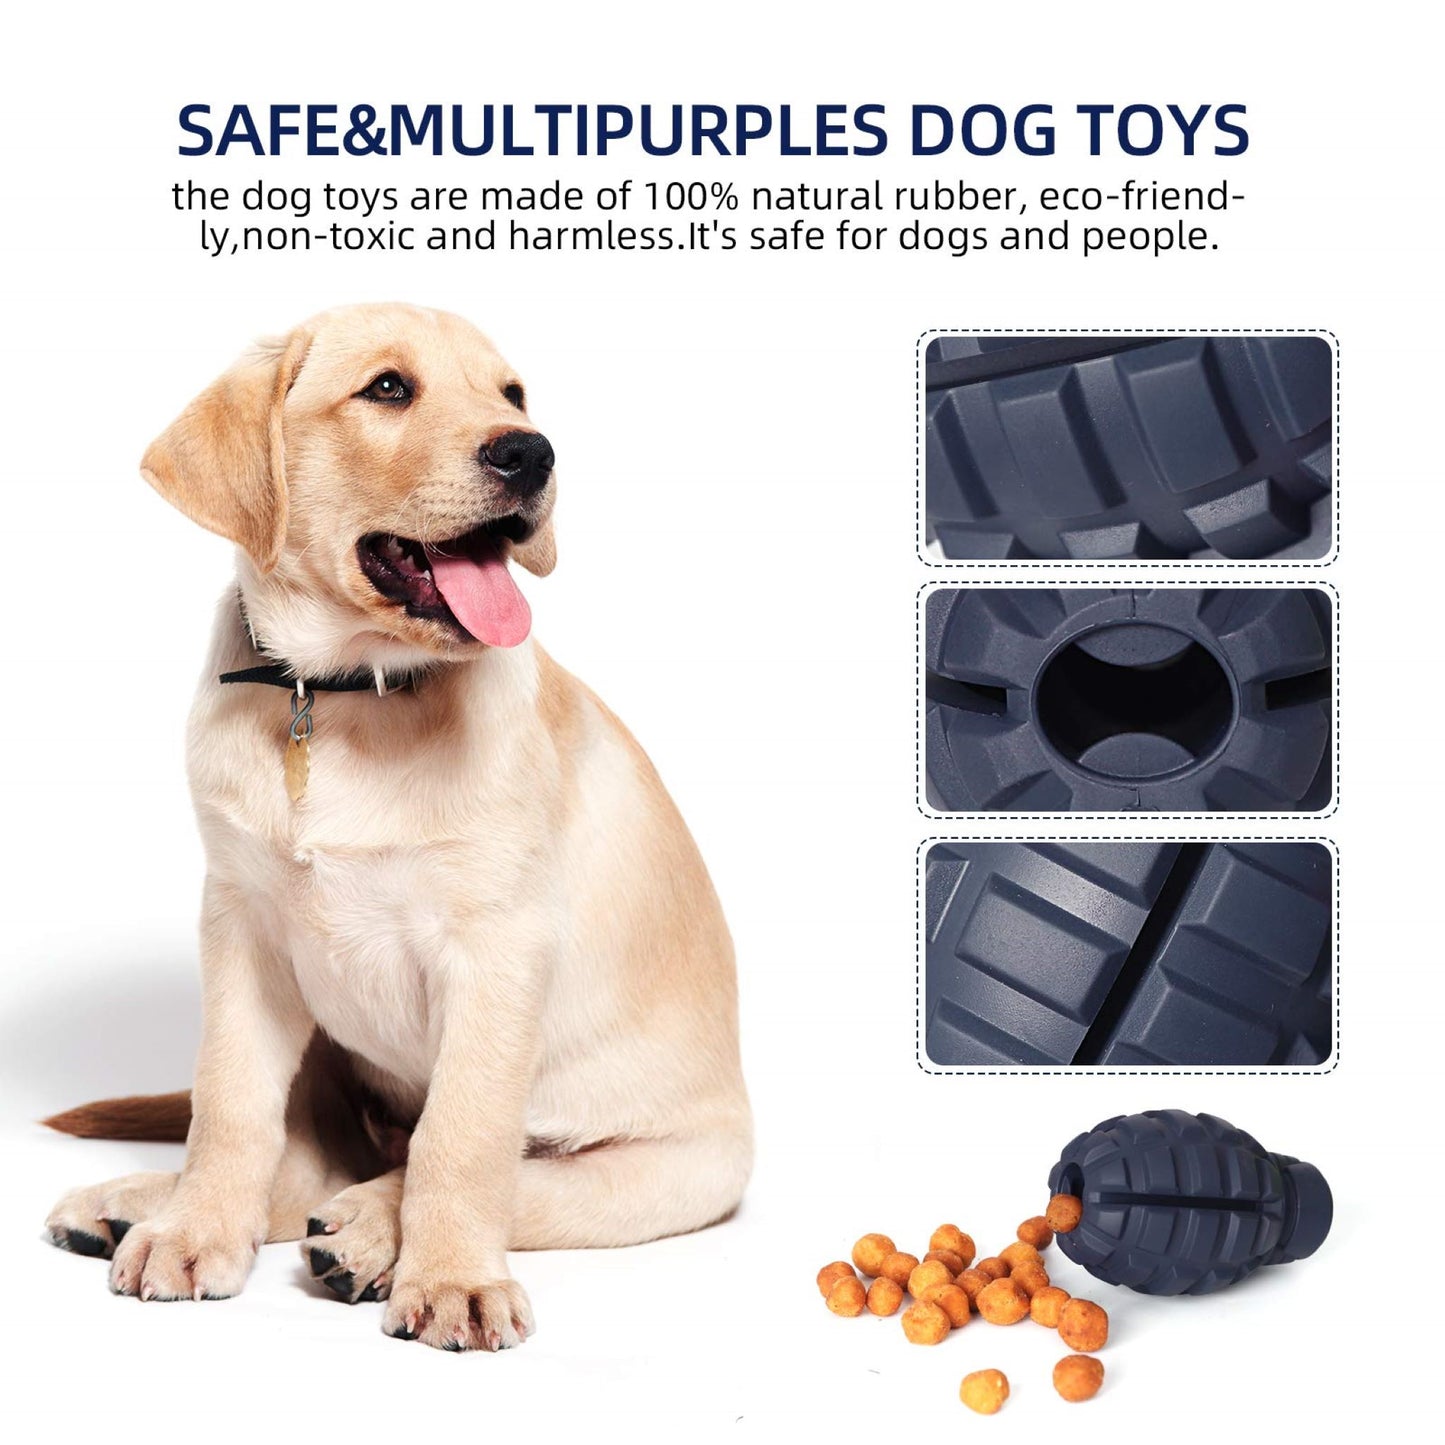 ROYAL PETS USA Indestructible, Durable & Tough Grenade Dog Chew Toy for Aggressive Chewers. Slow Treat Dispensing Interactive Toys for S, M & L Breed- 100% NATURAL RUBBER -10000 BITES TESTED - UNIQUE DESIGN FOR ORAL CARE